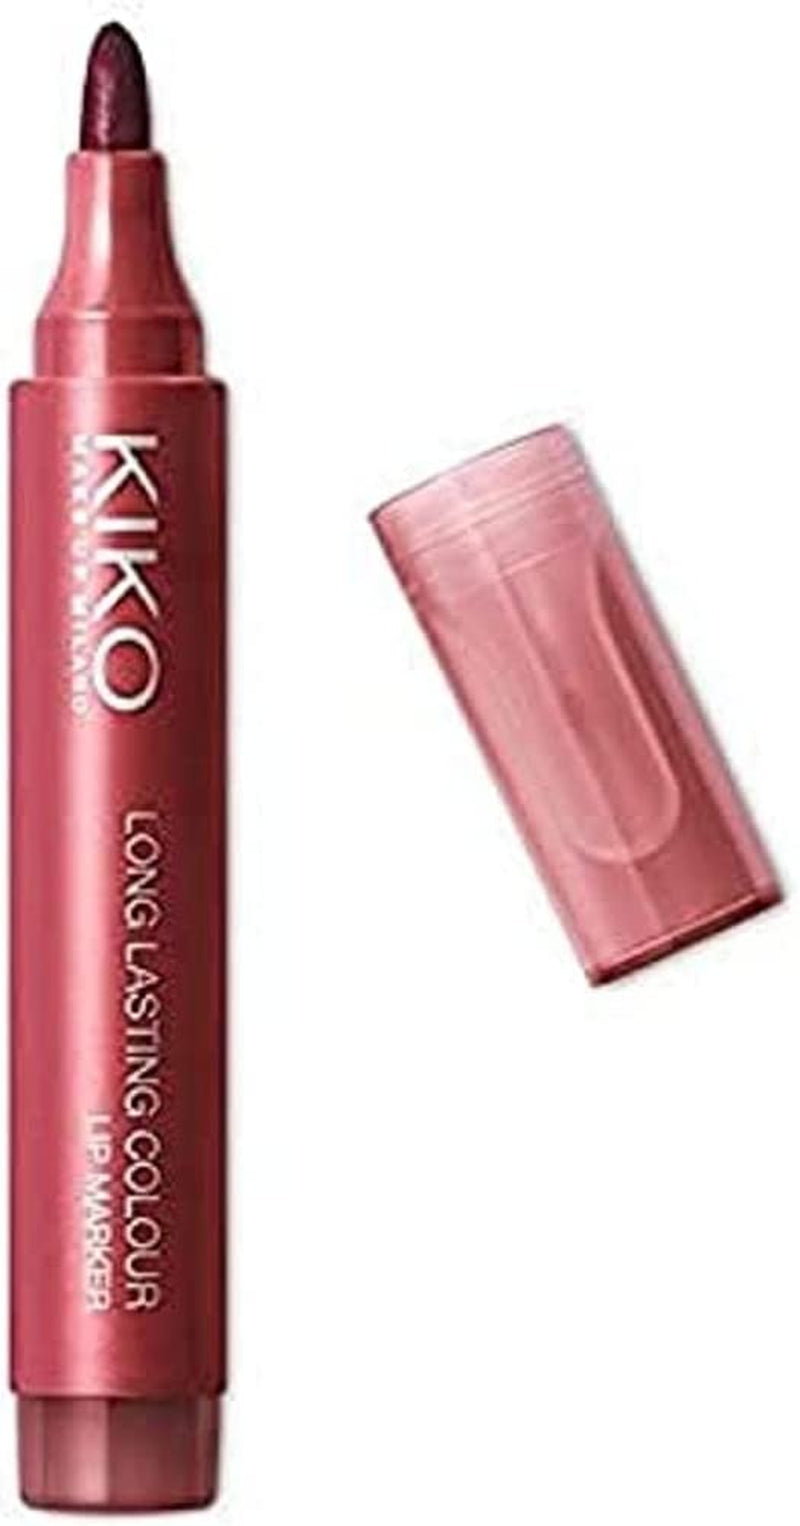 KIKO Milano Long Lasting Colour Lip Marker 104 | No Transfer Lip Marker with a Natural Tattoo Effect and Extremely Long-Lasting Wear (10 Hours)